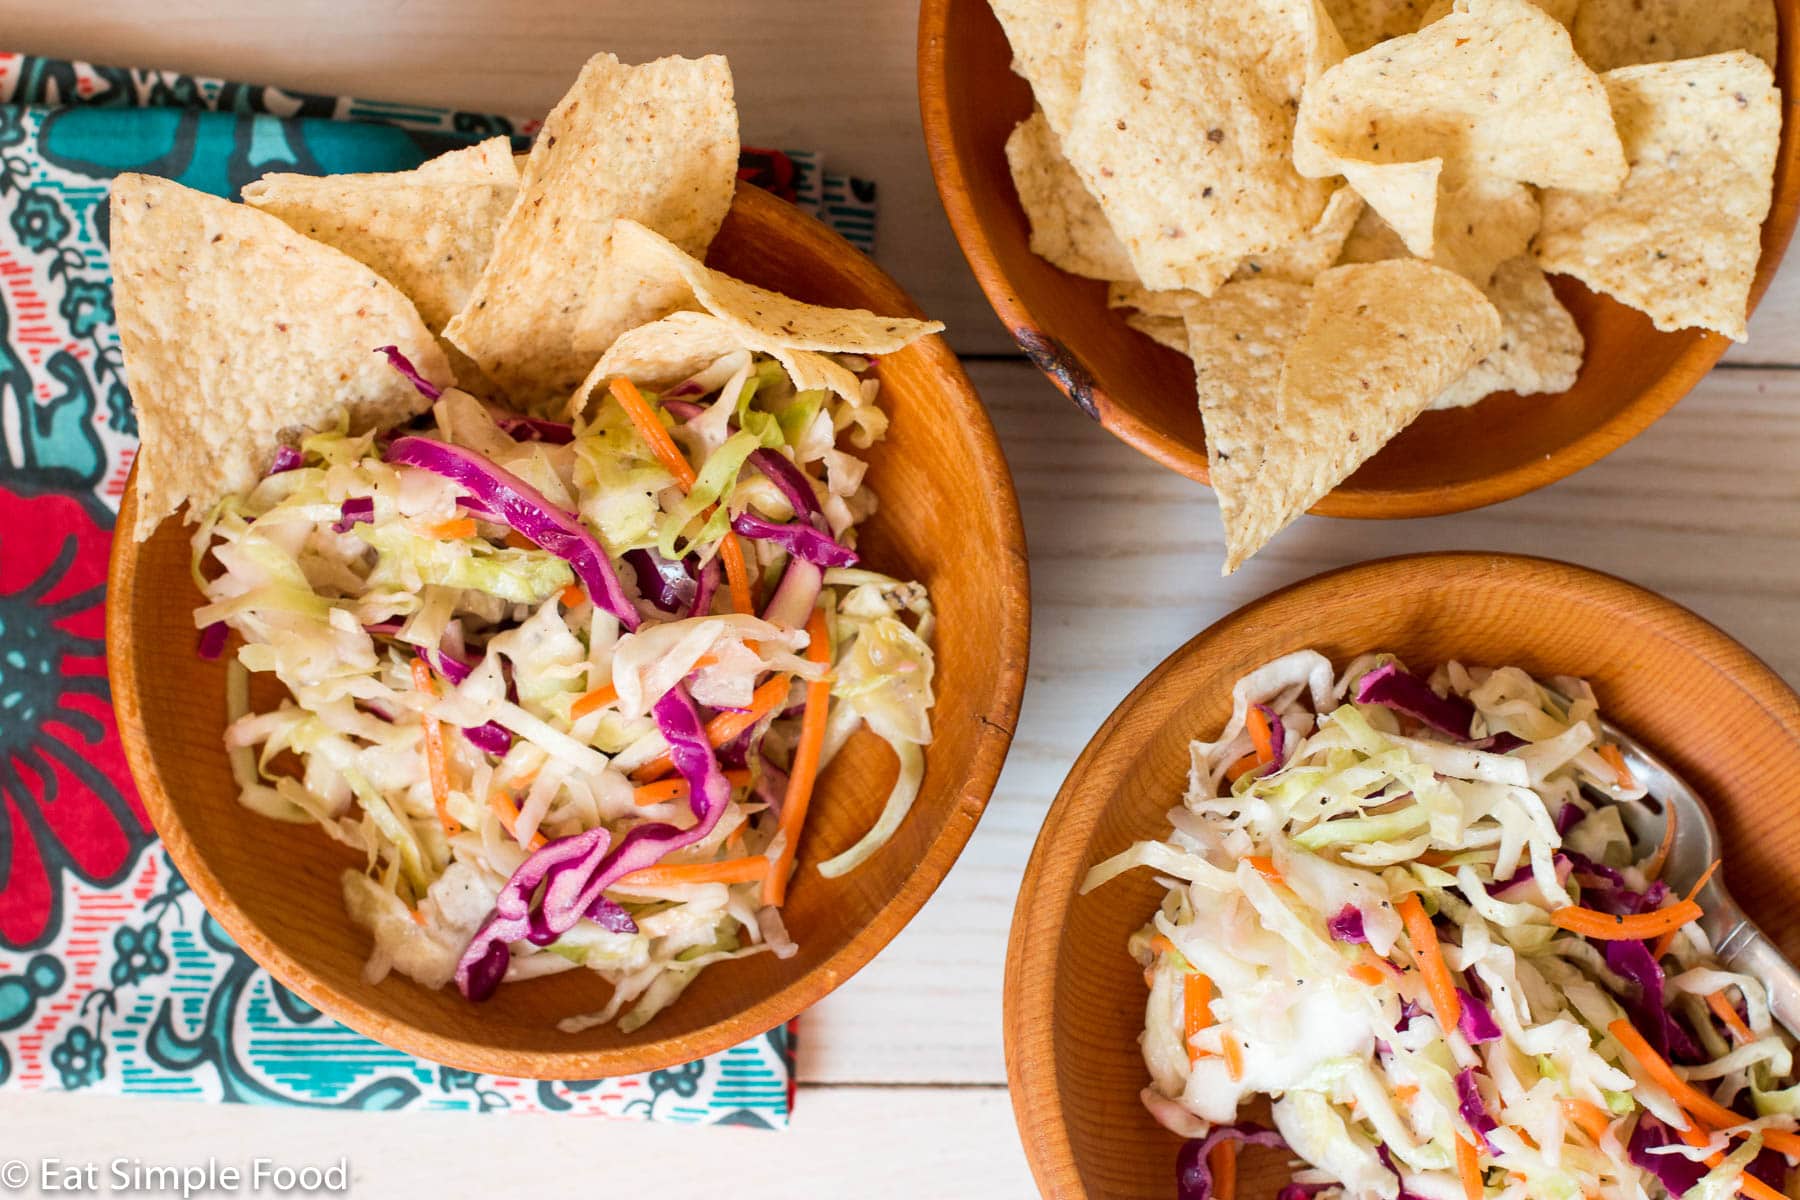 2 Small wood bowl filled with shredded cole slaw with crispy tortilla chips in it. One wood bowl full of tortilla chips.